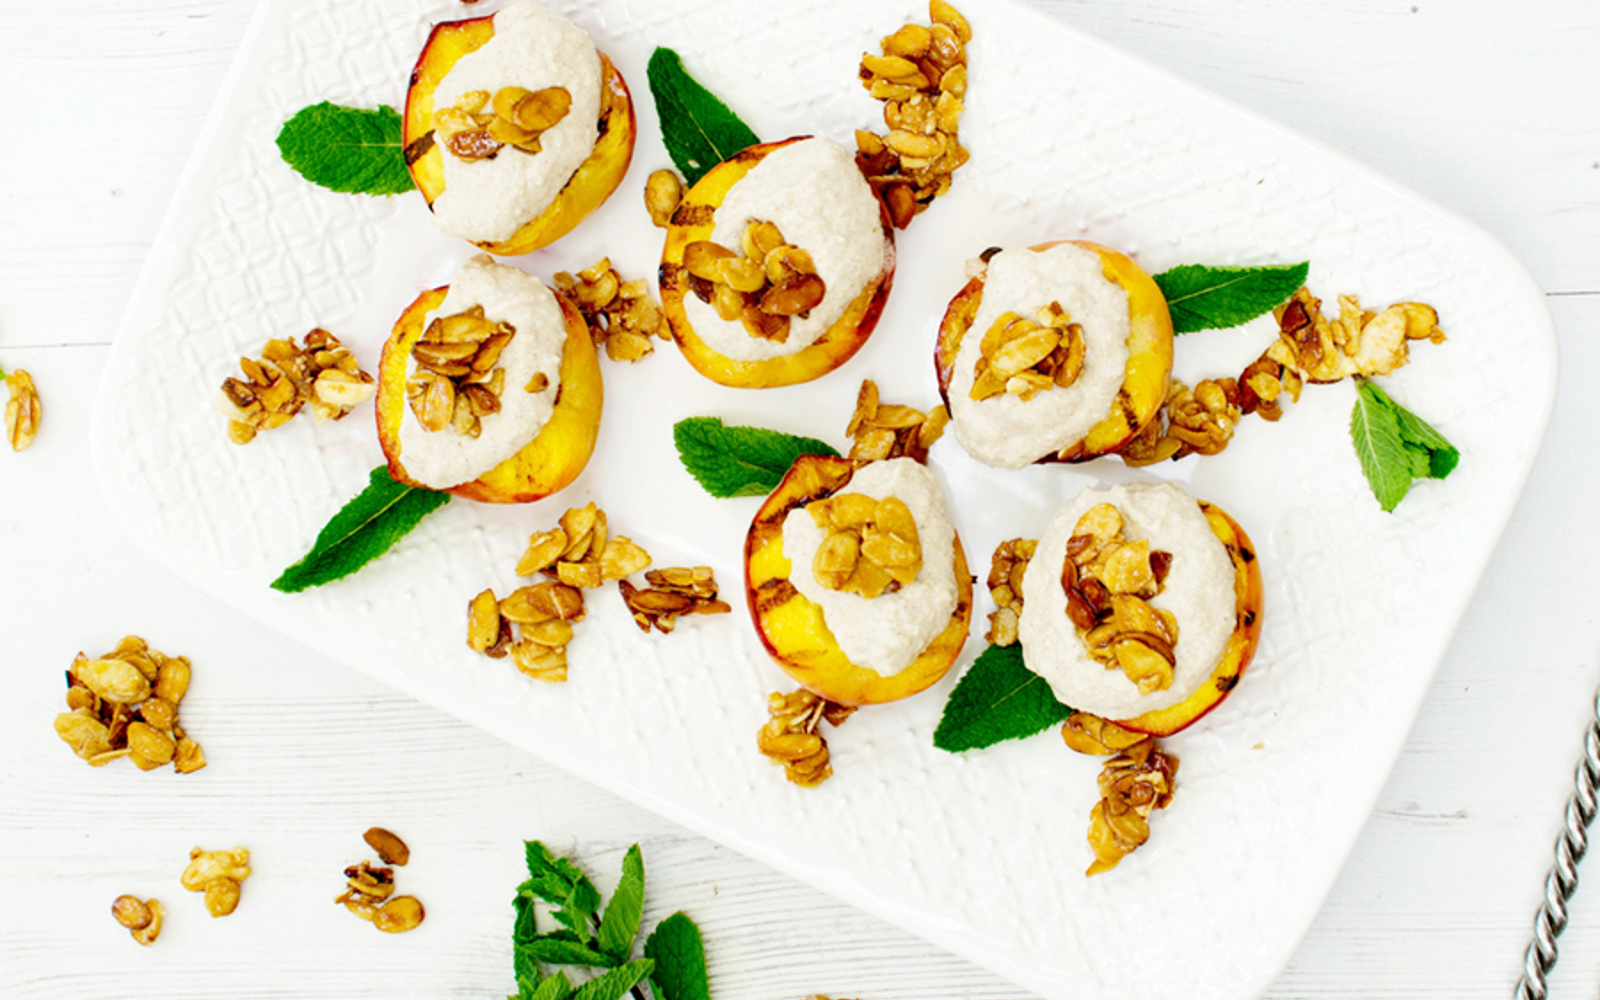 Roasted peaches with cashew cinnamon cream and caramelized almonds